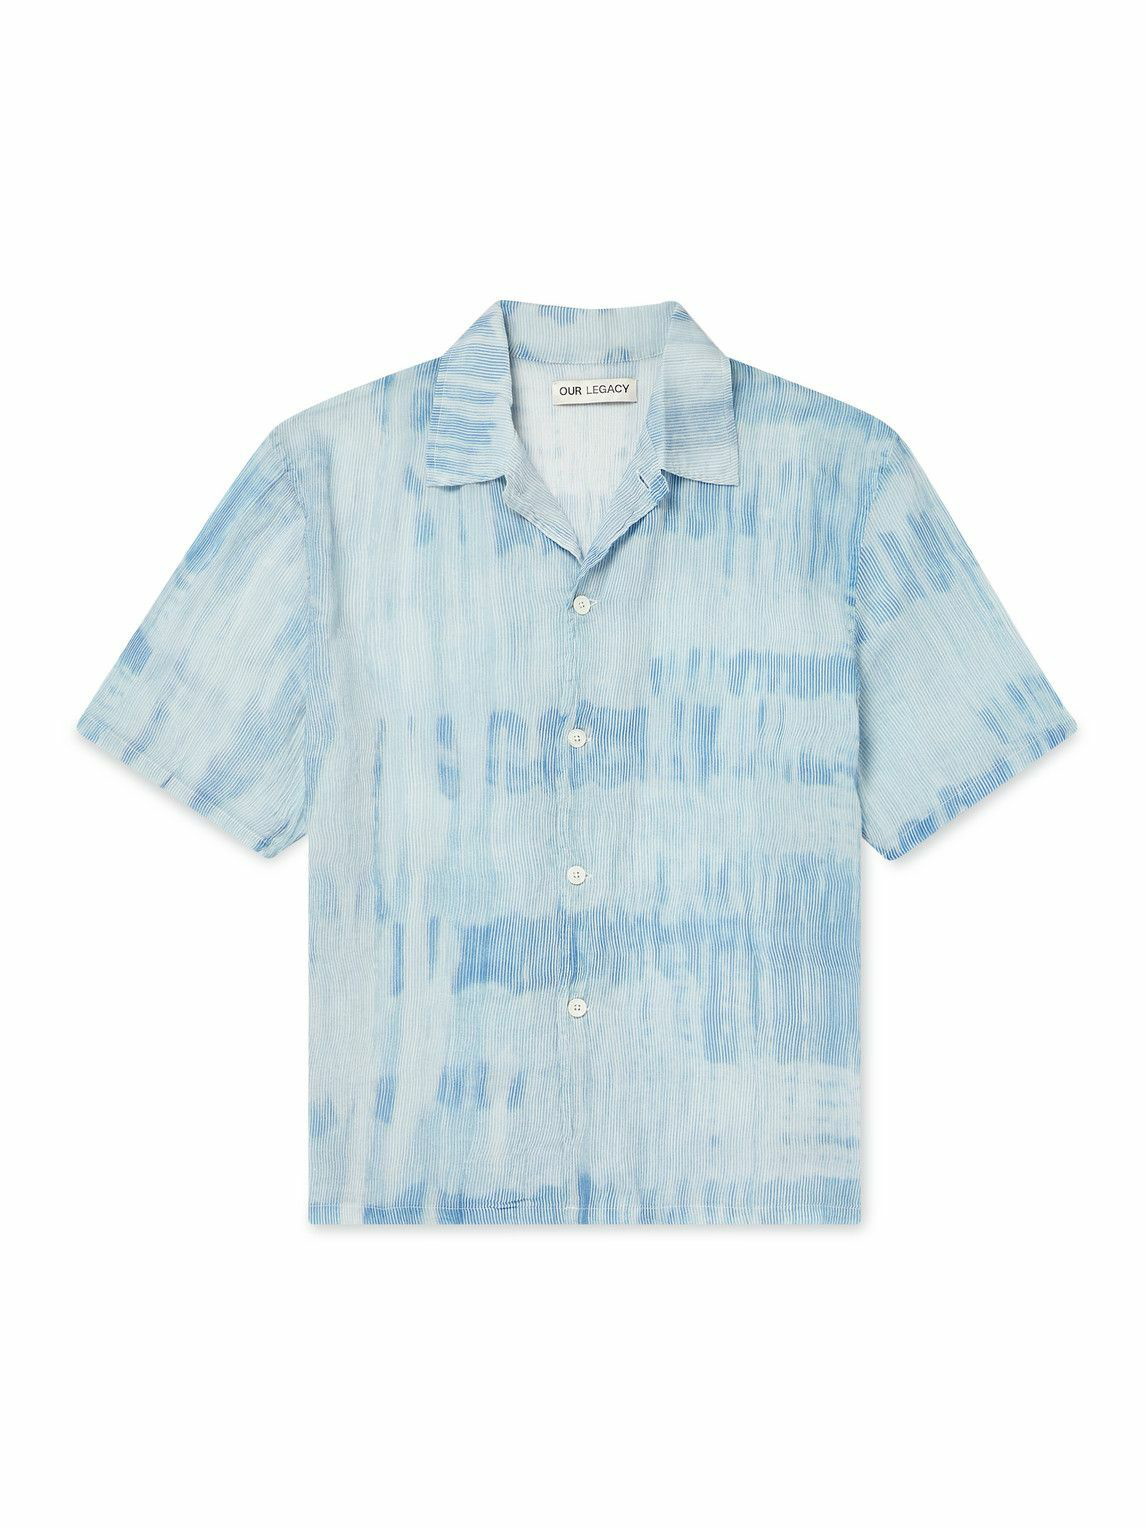 Our Legacy - Printed Striped Cotton-Blend Shirt - Blue Our Legacy